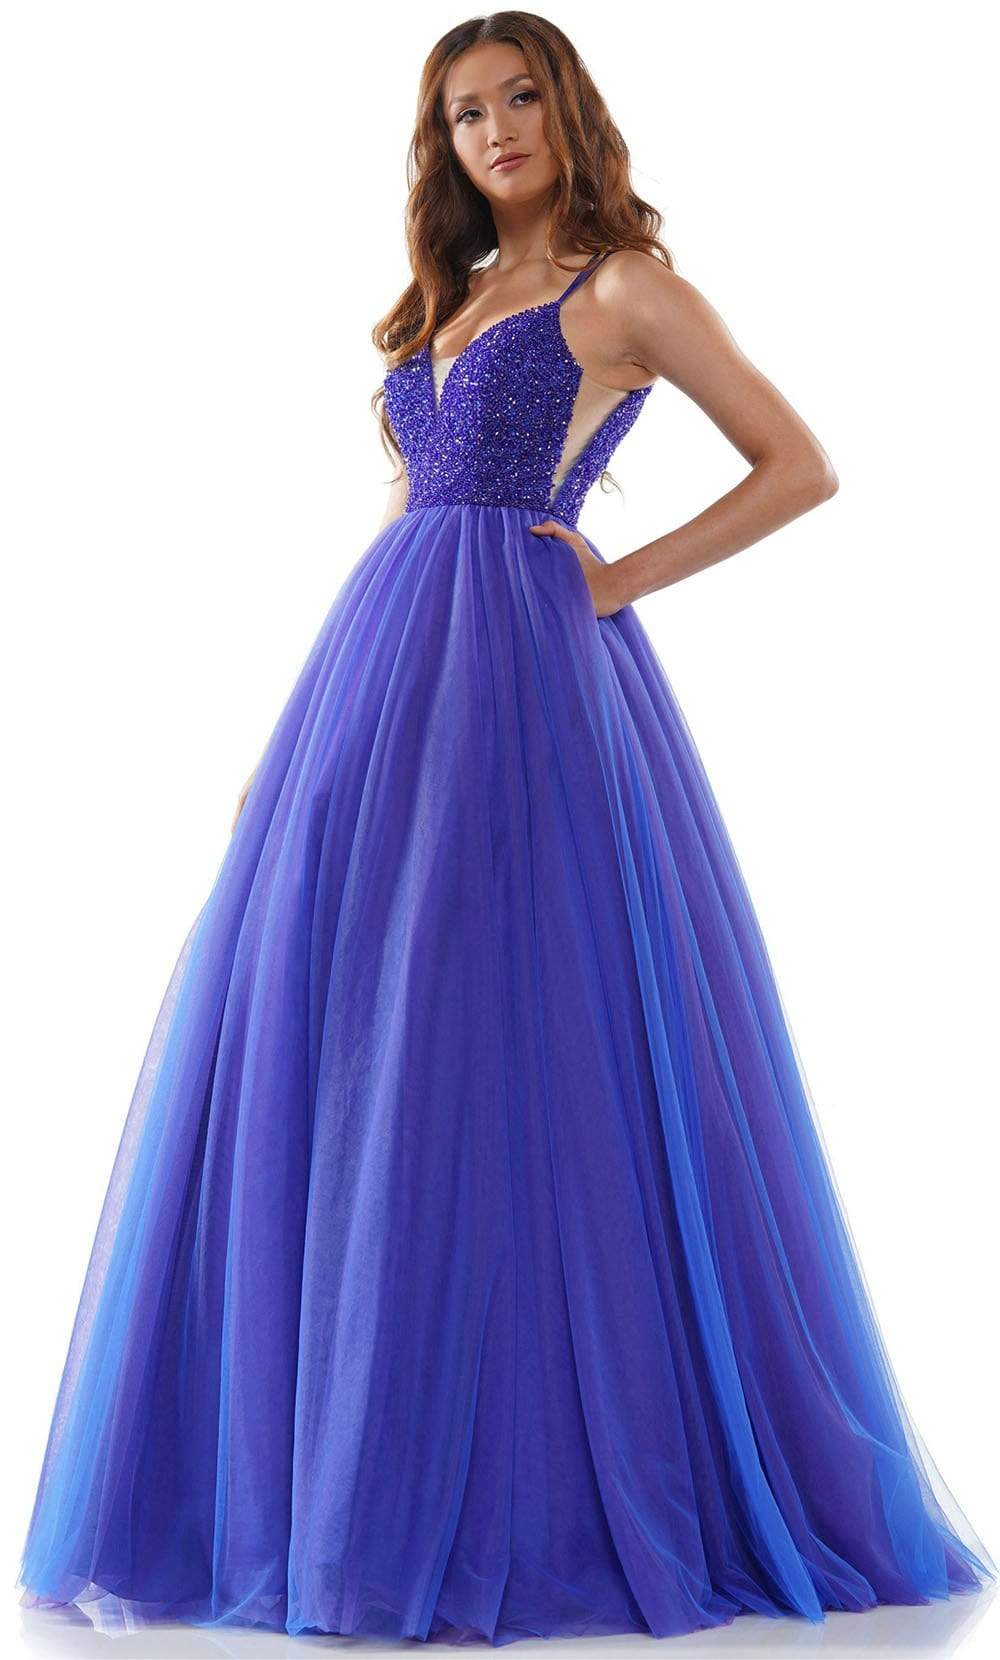 Colors Dress - 2382 Beaded Plunging Sweetheart Ballgown Prom Dresses 0 / Royal Purple